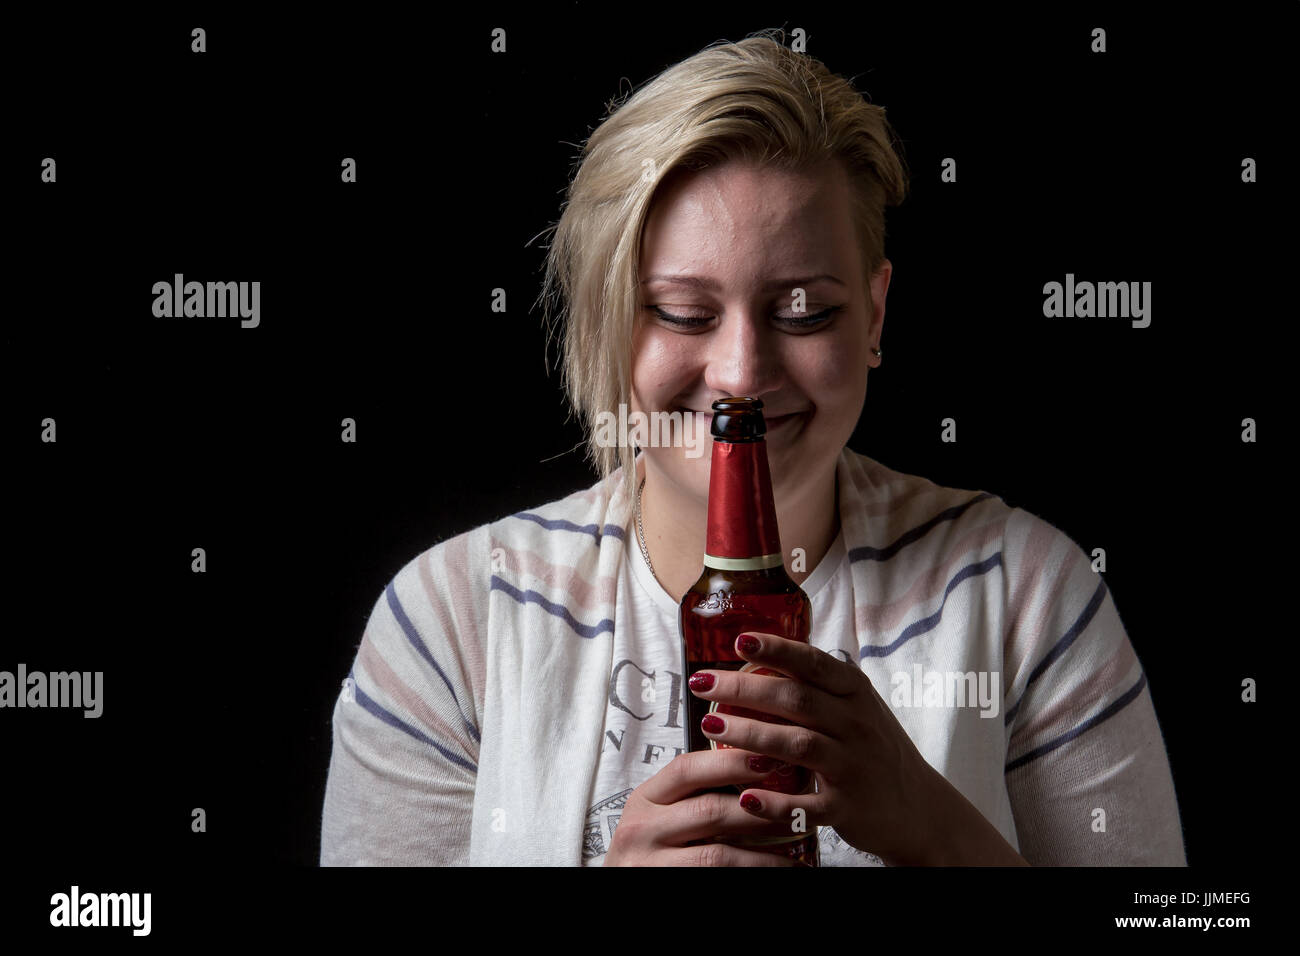 Cute female holding beer bottle and smiling Stock Photo